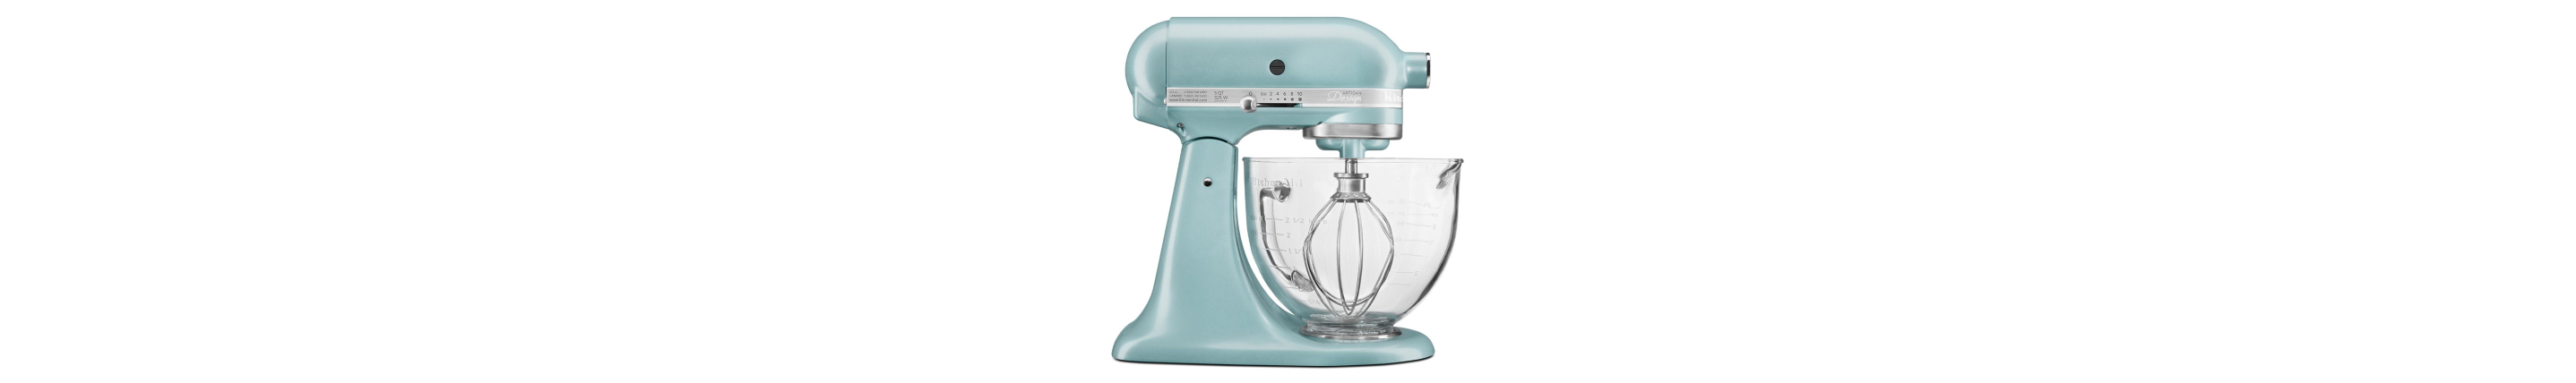 Side profile of light blue stand mixer with glass bowl